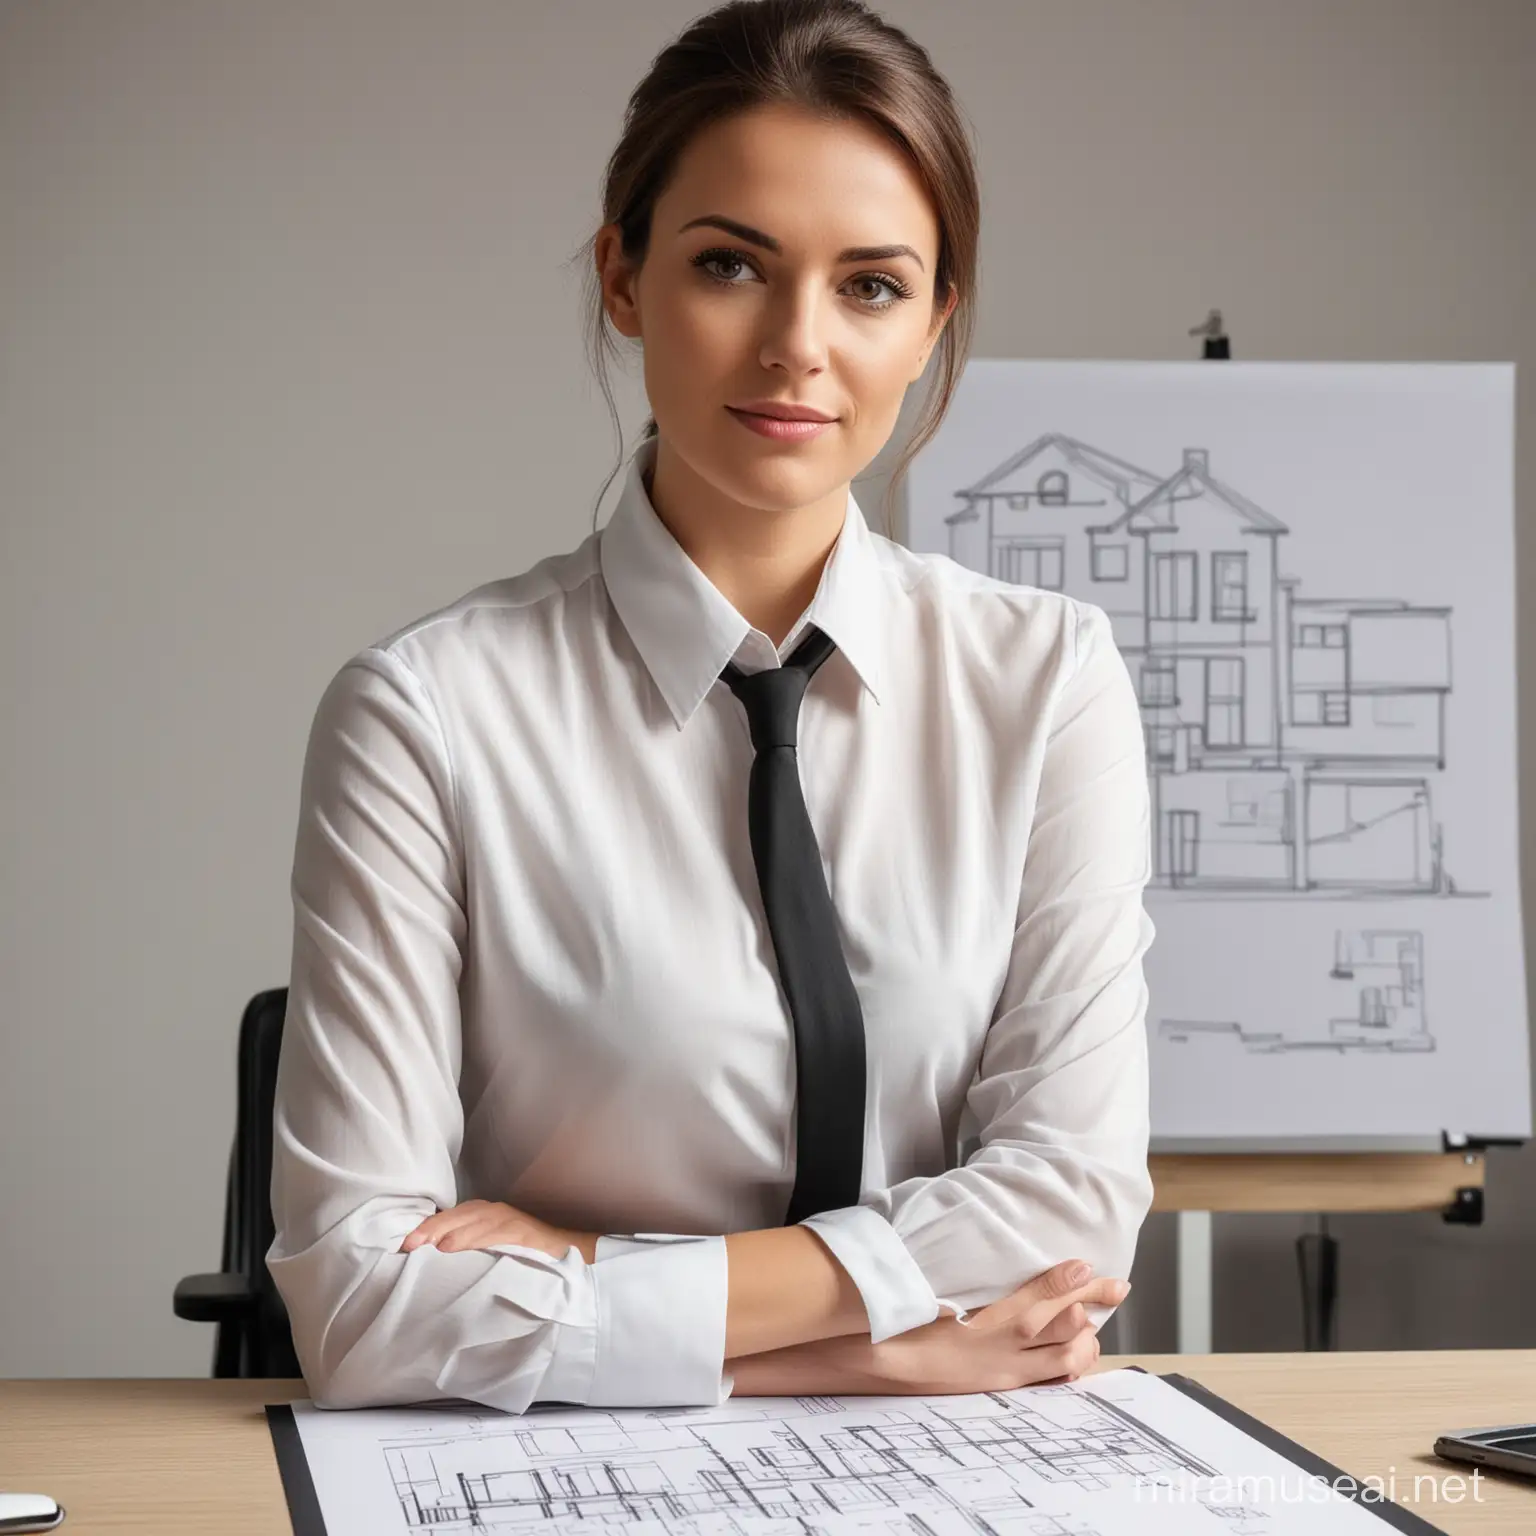 Female Manager Leading Real Estate Team in Office